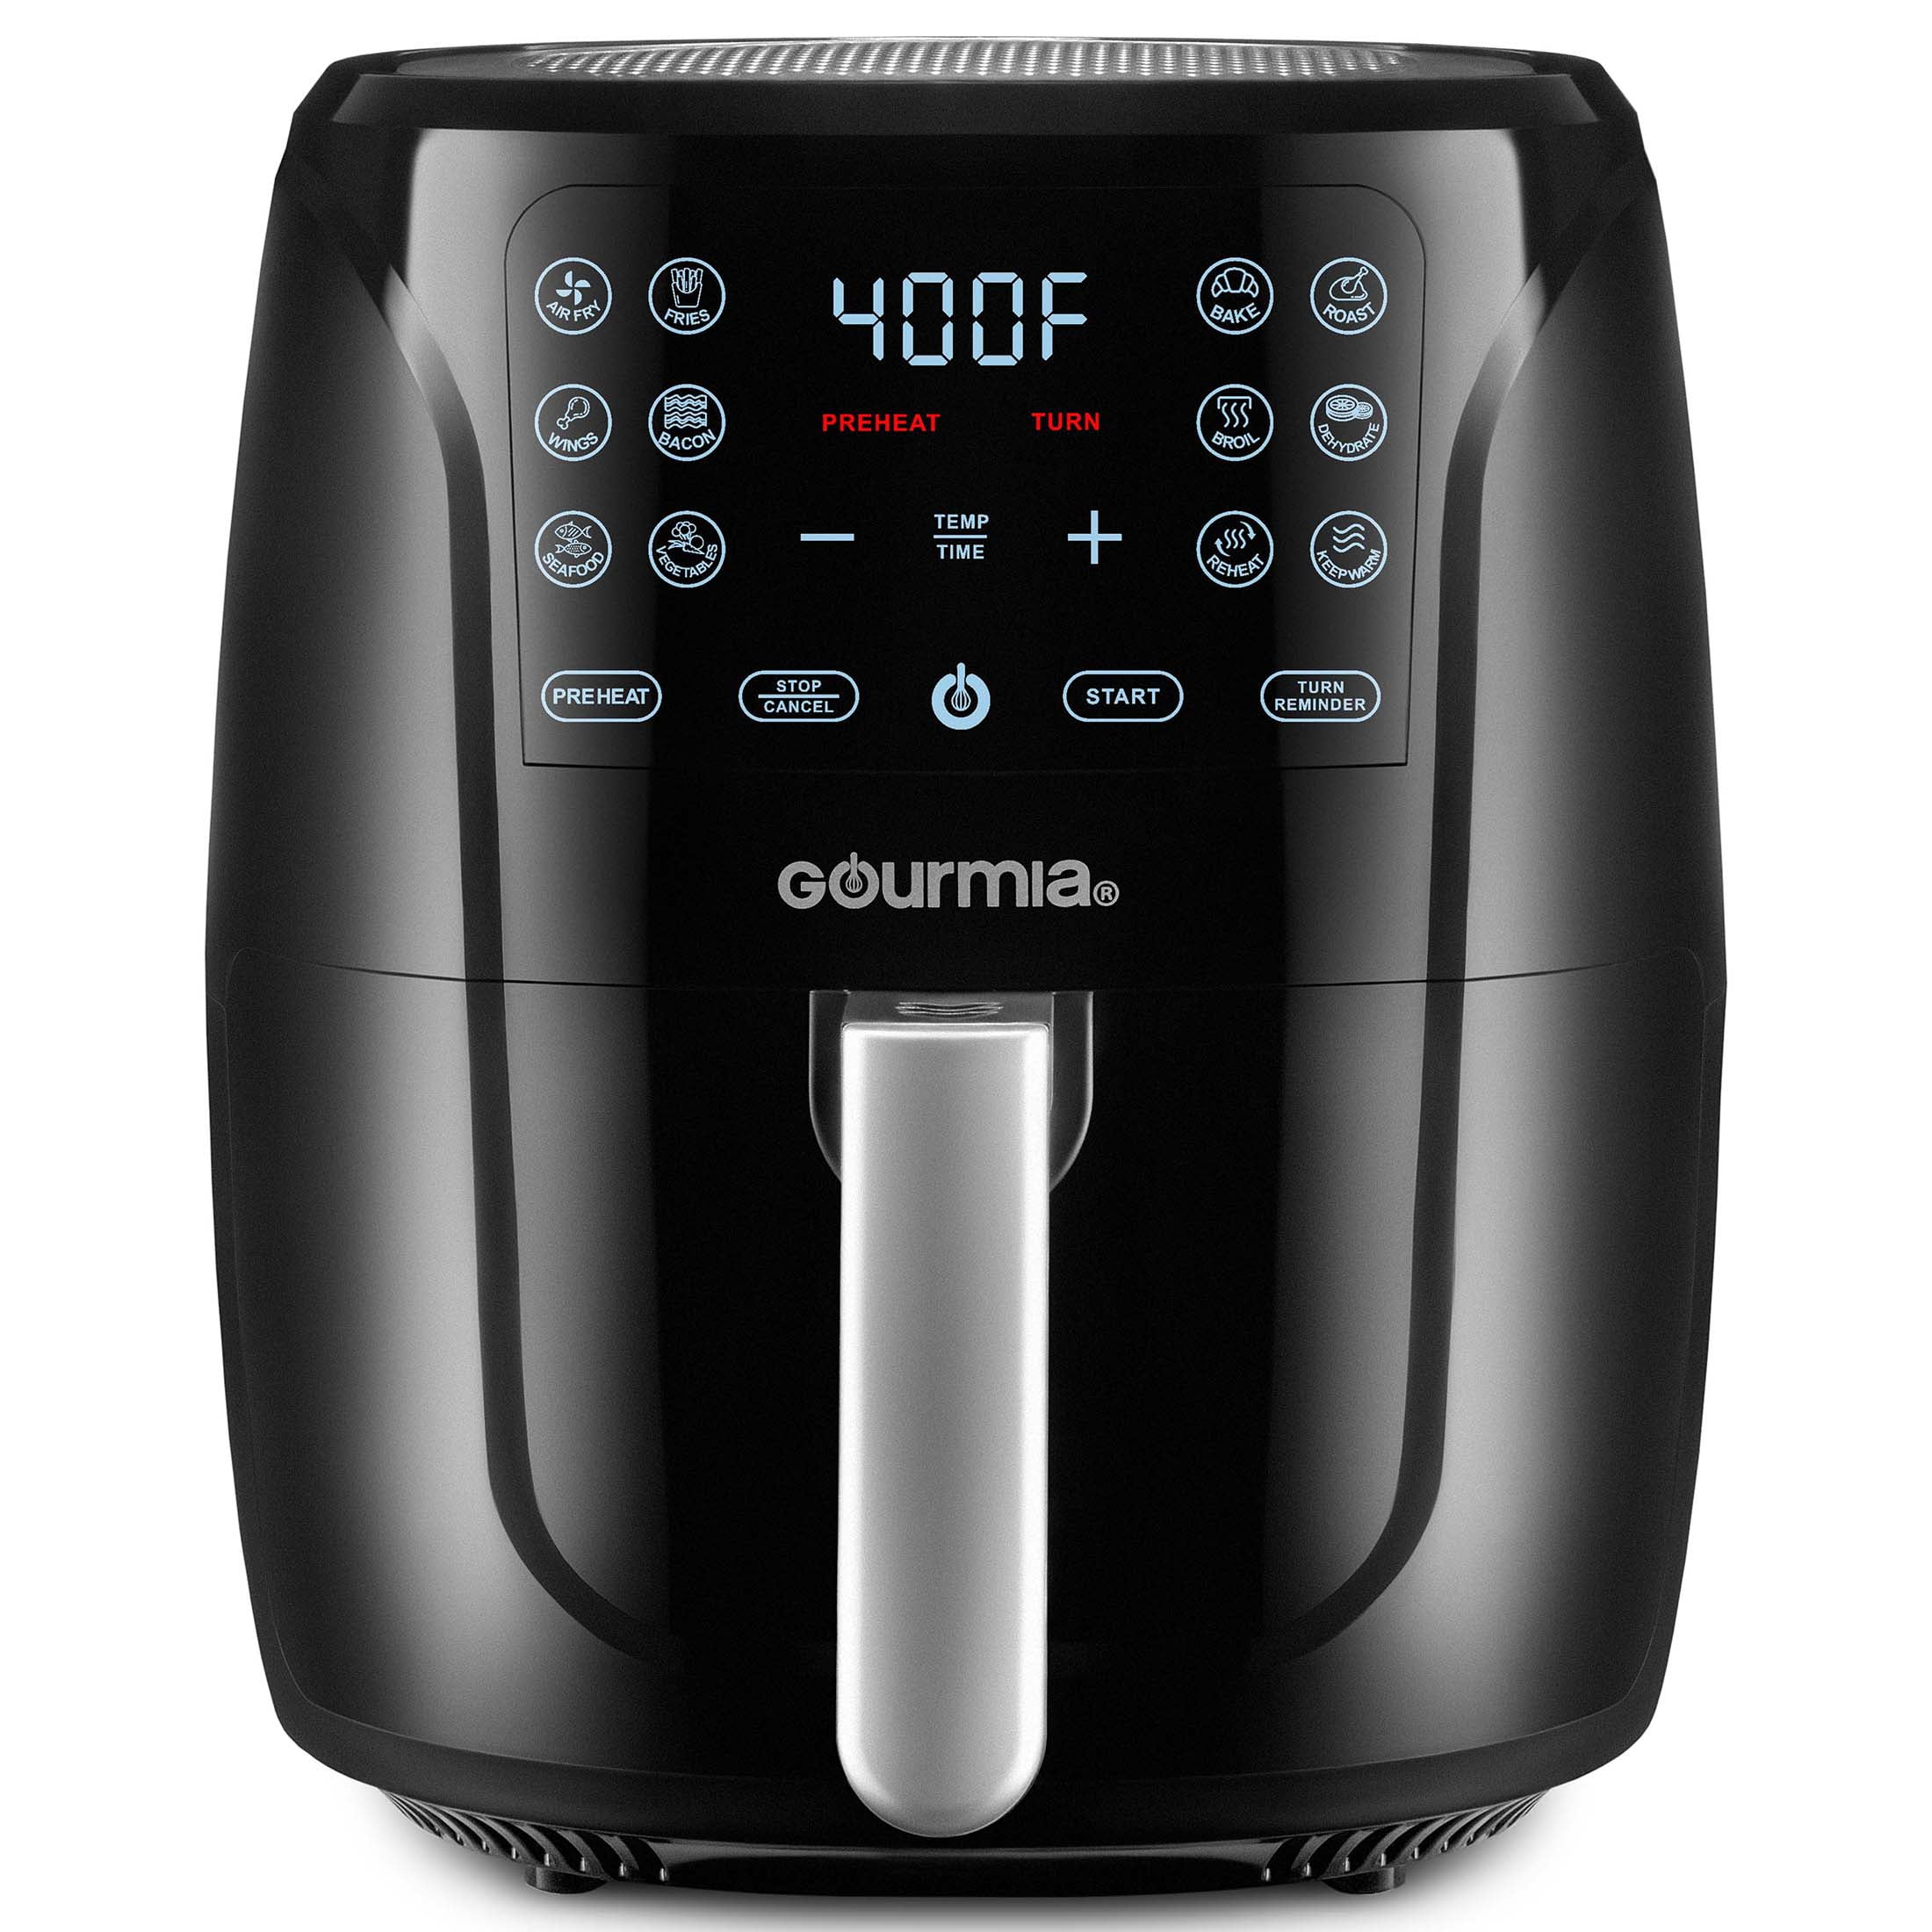 Grab This 6-Quart Digital Air Fryer for $50 During 1-Day Sale - CNET